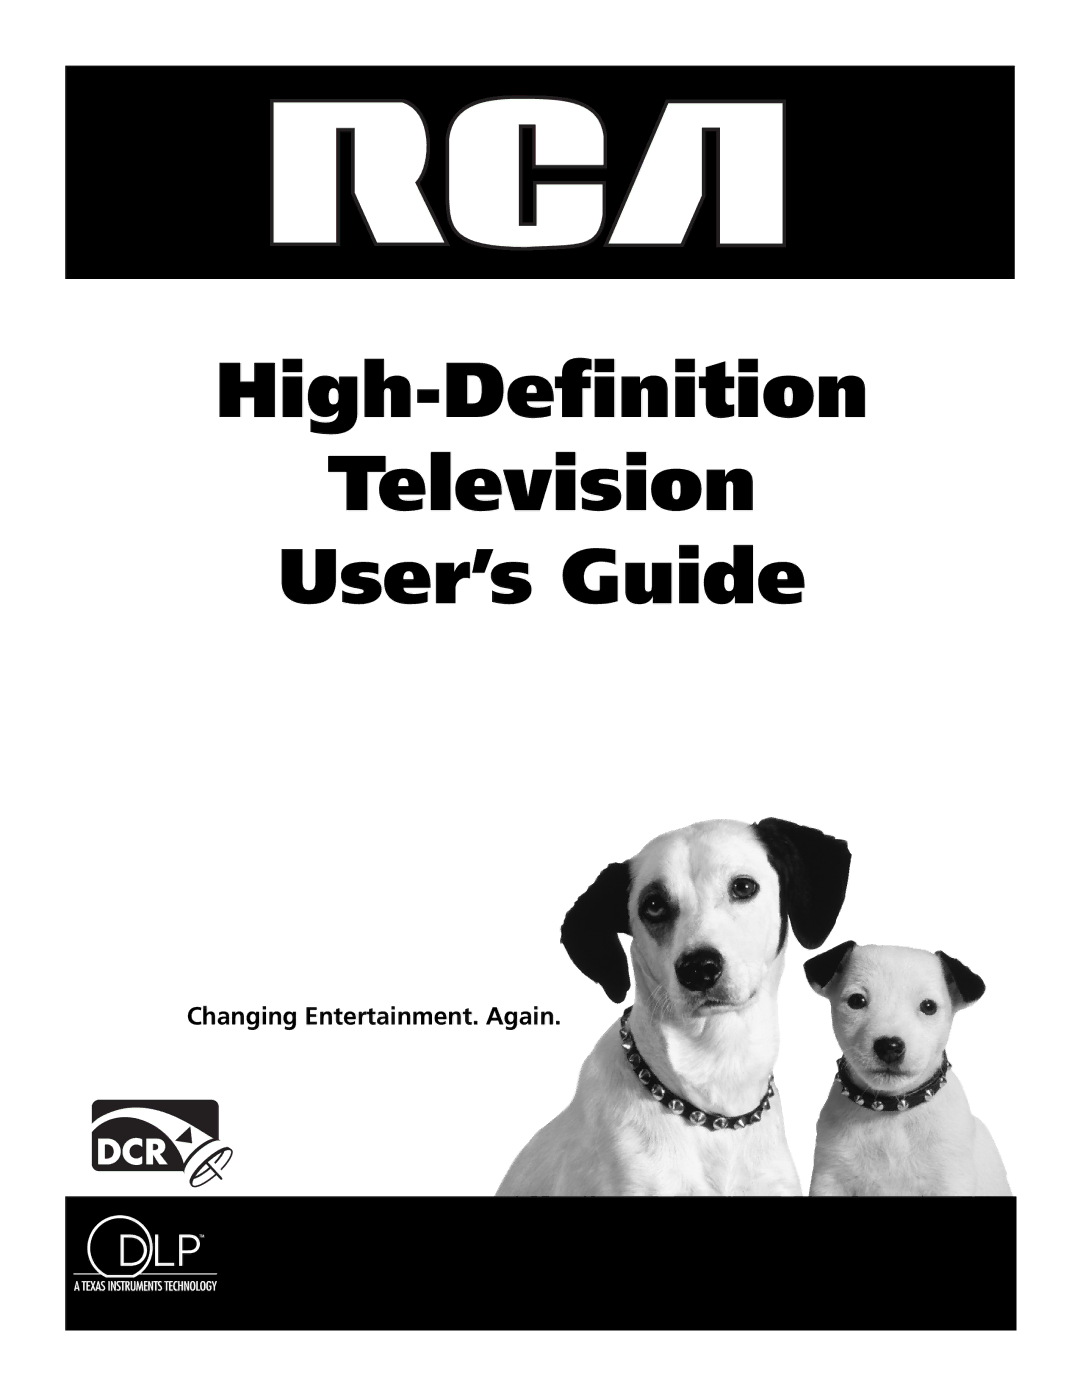 RCA HDTV manual High-Deﬁnition Television User’s Guide, Changing Entertainment. Again 